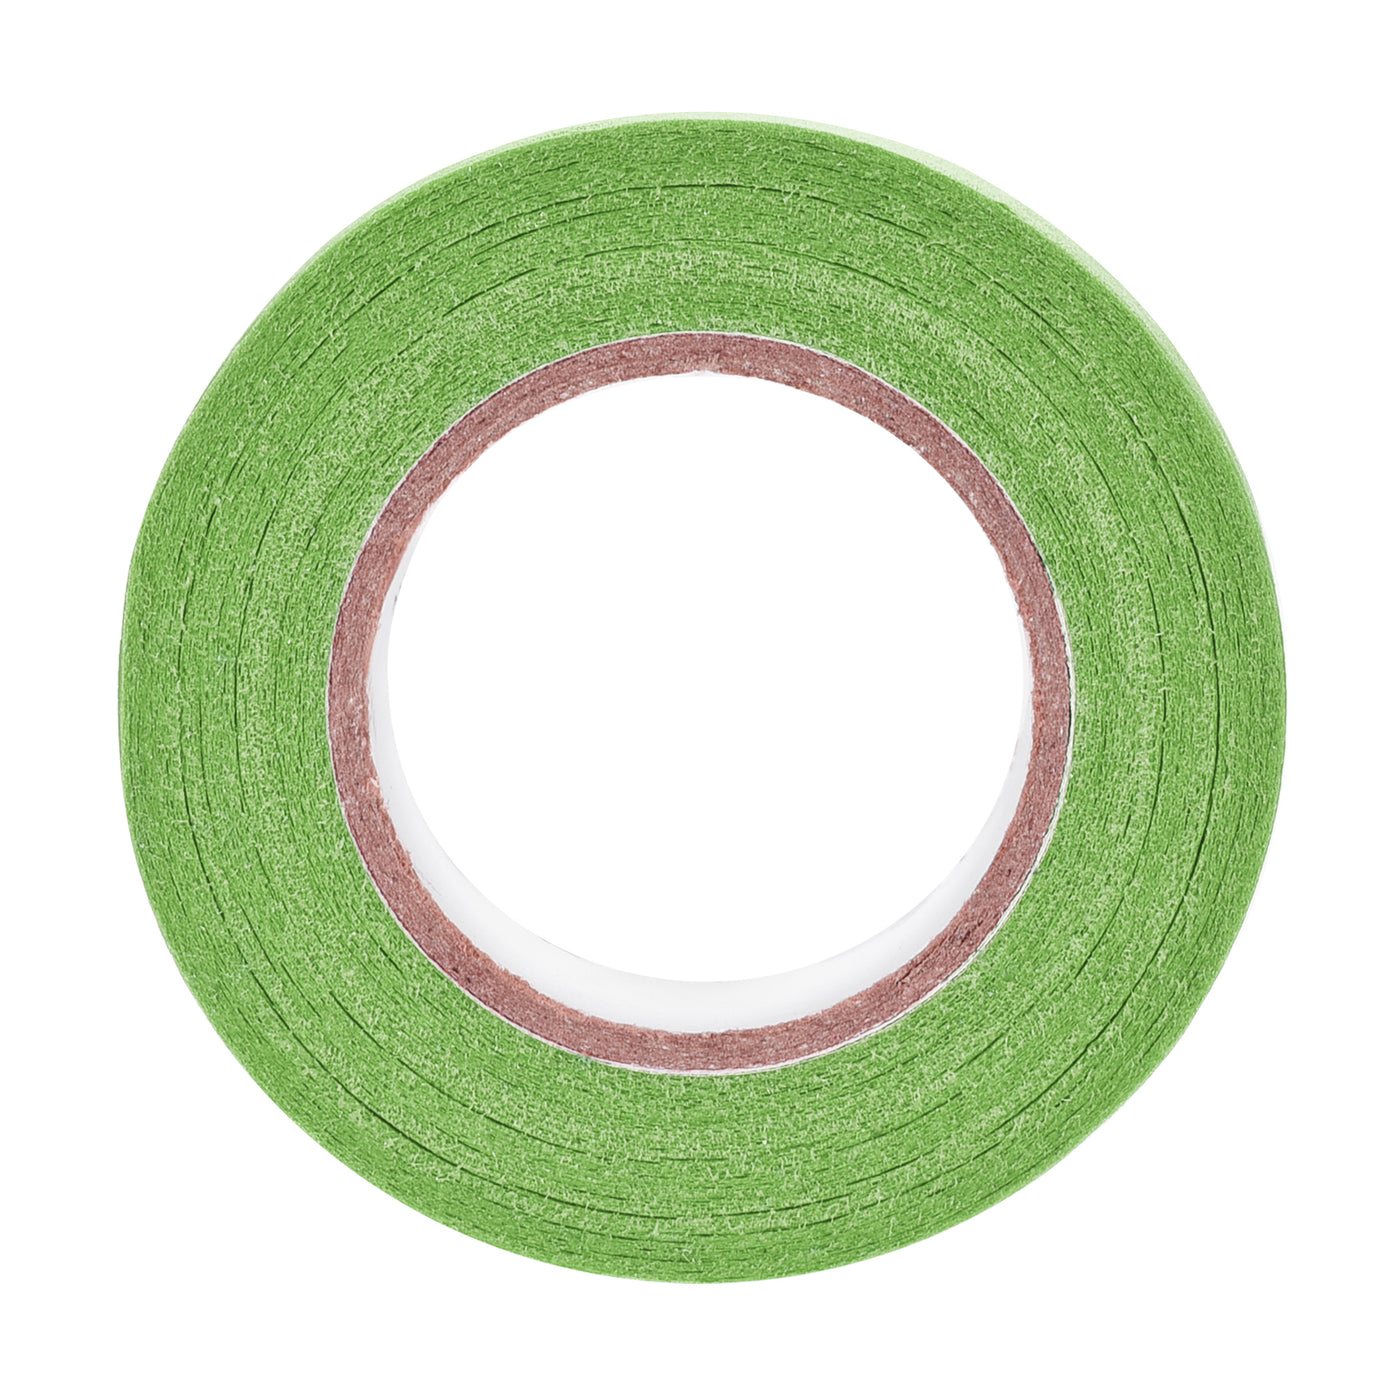 uxcell Uxcell 3Pcs 12mm 0.48 inch Wide 20m 21 Yards Masking Tape Painter Tape Roll Light Green